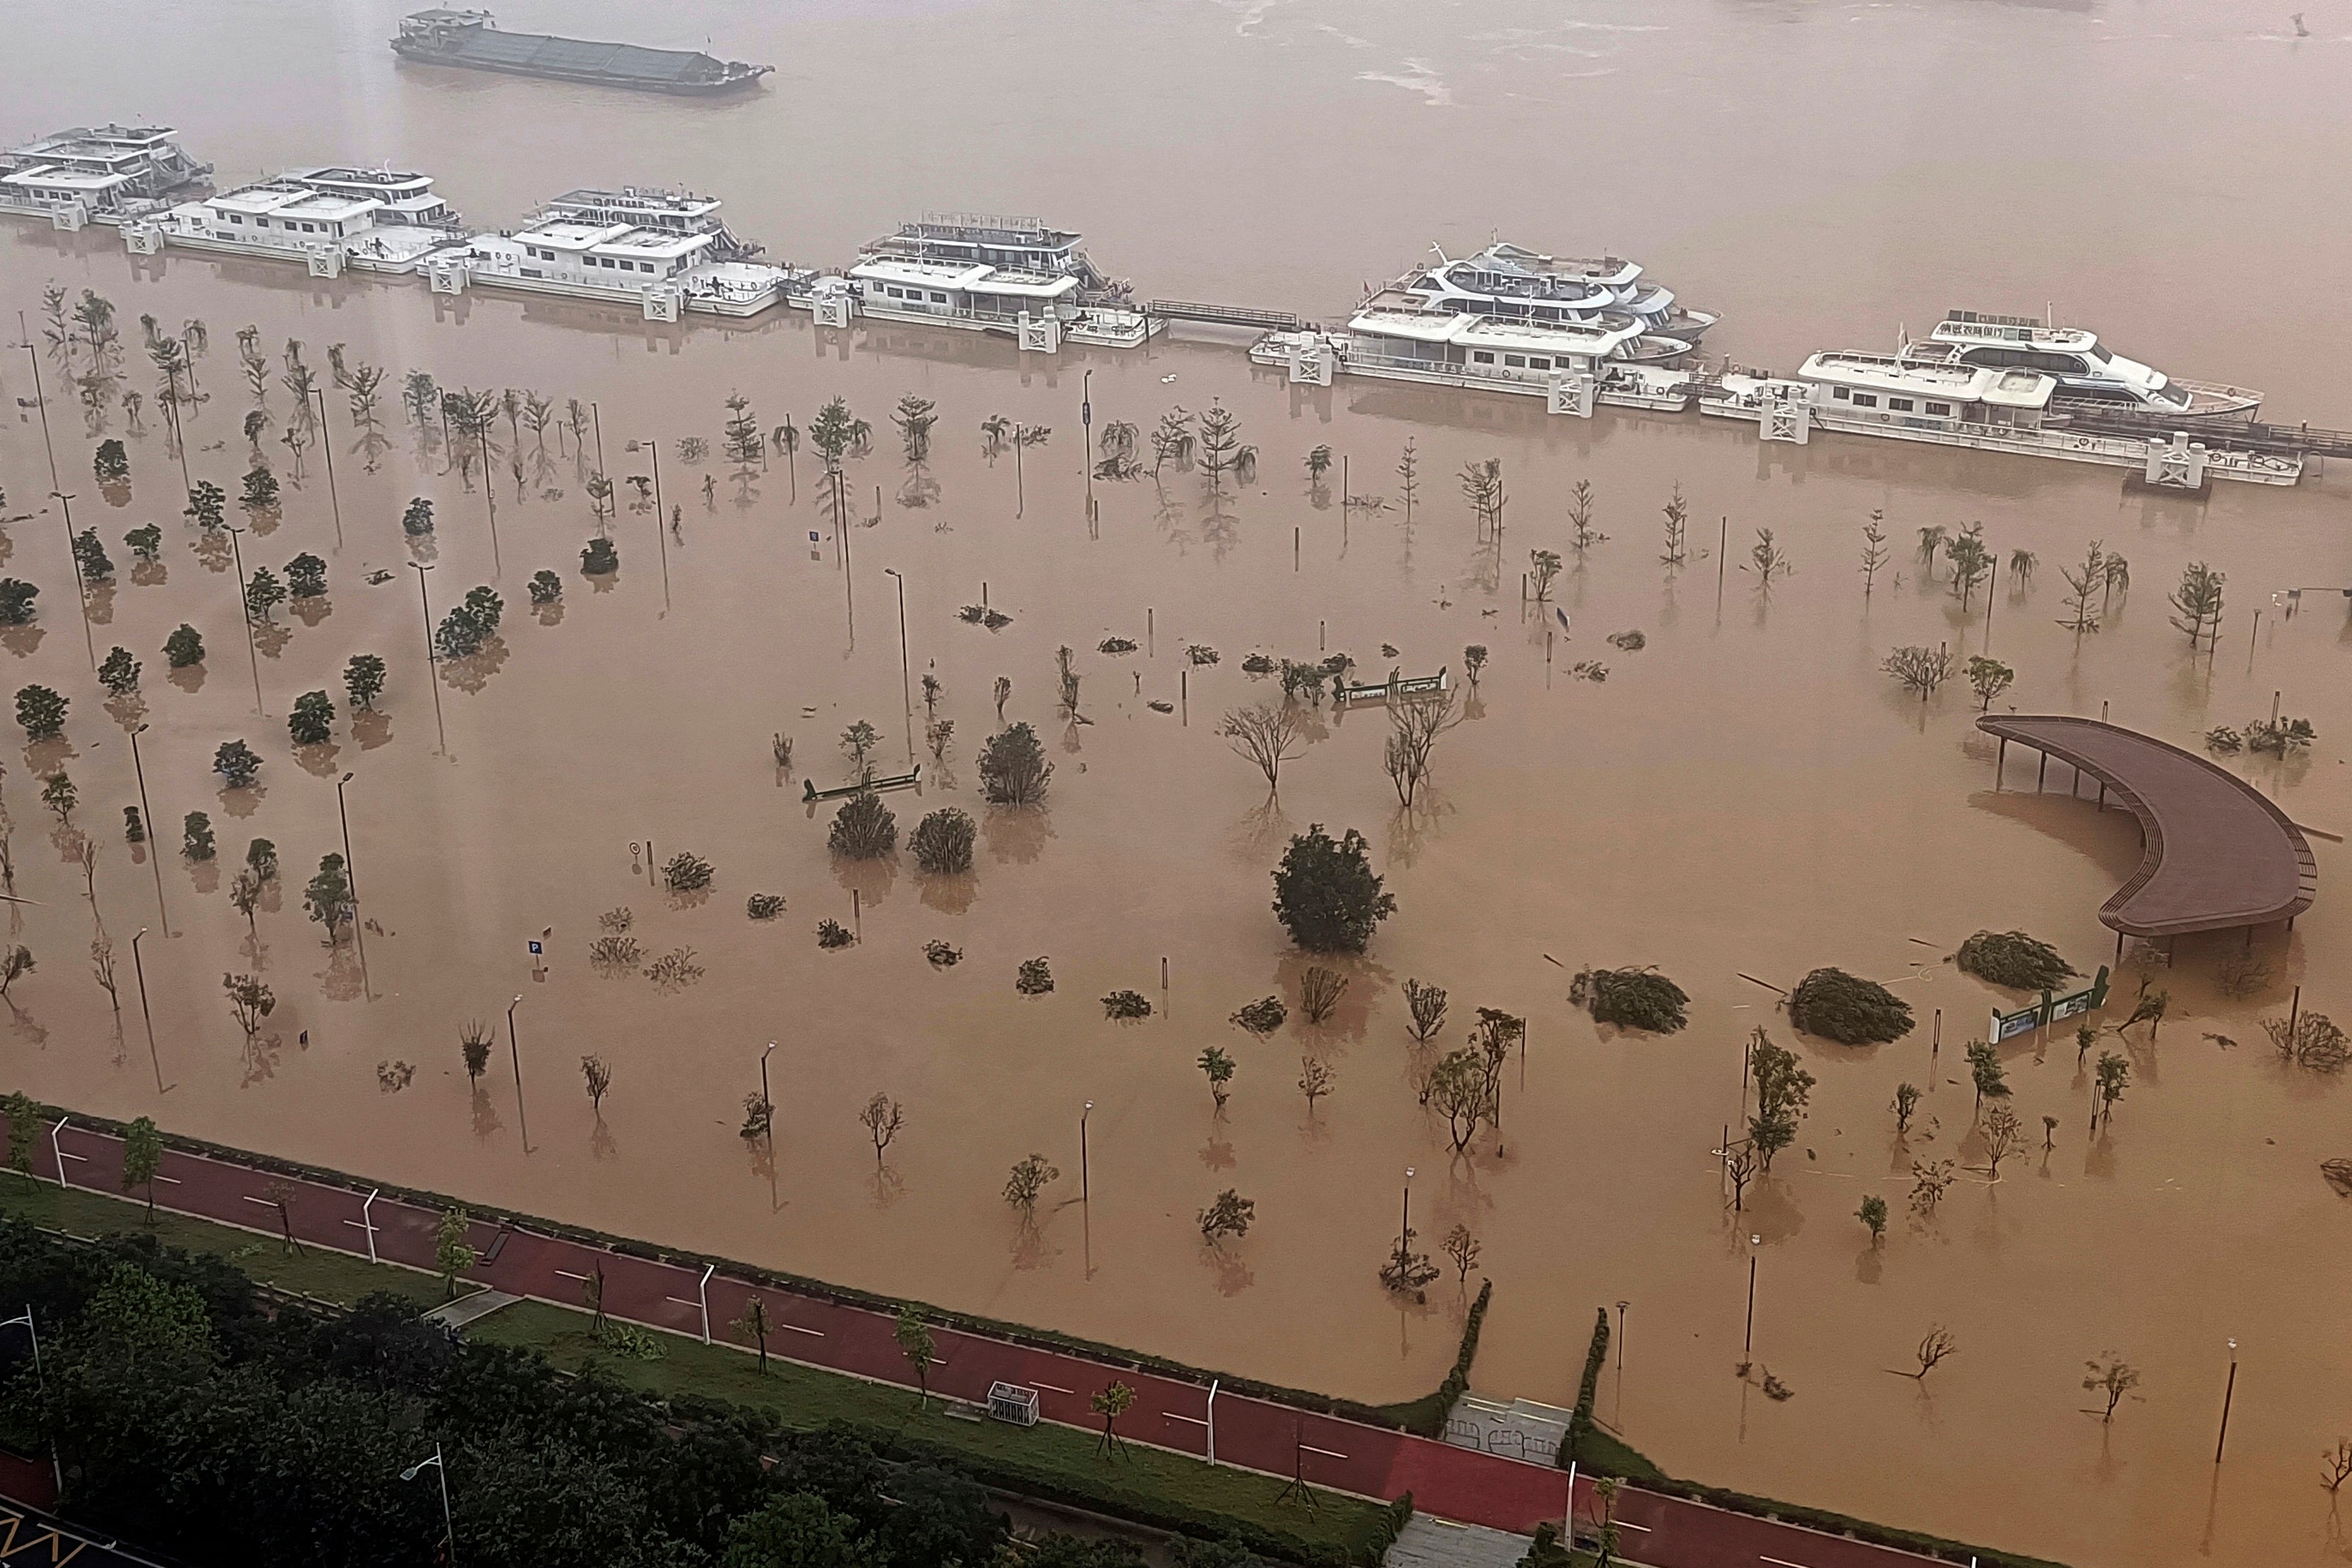 A flooded riverside park along the Beijiang river in Qingyuan city in southern China's Guangdong